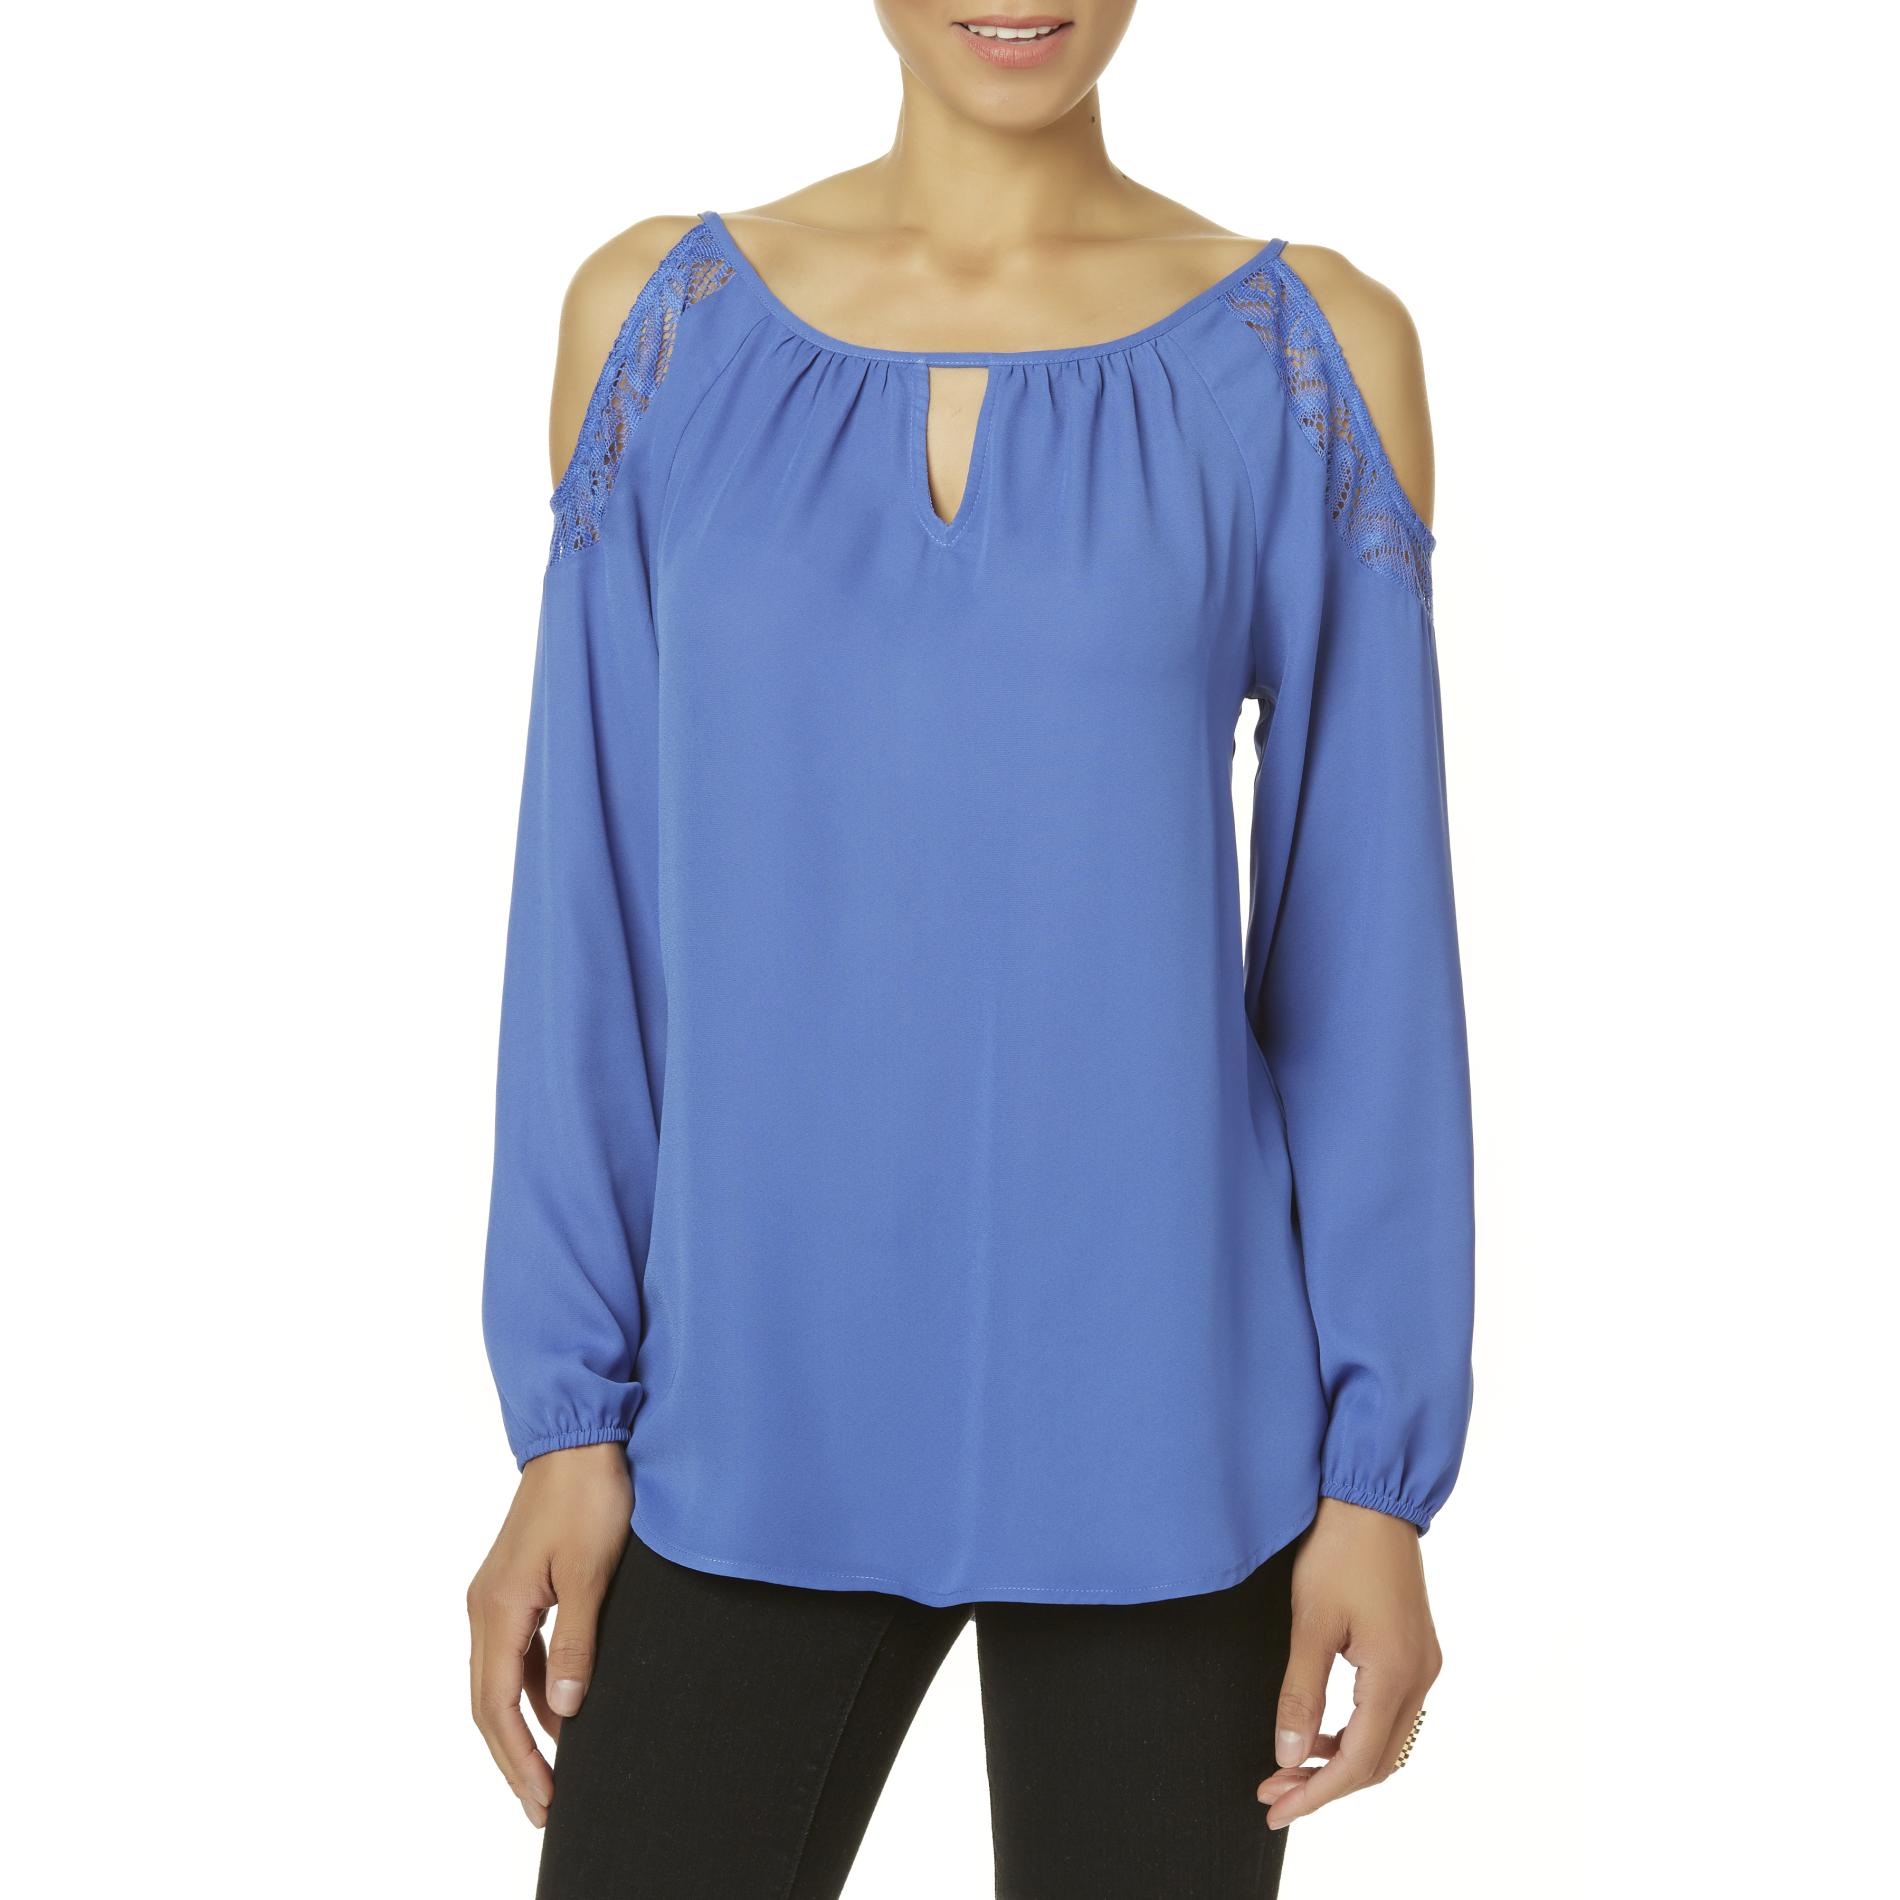 Simply Styled Women's Cold-Shoulder Top